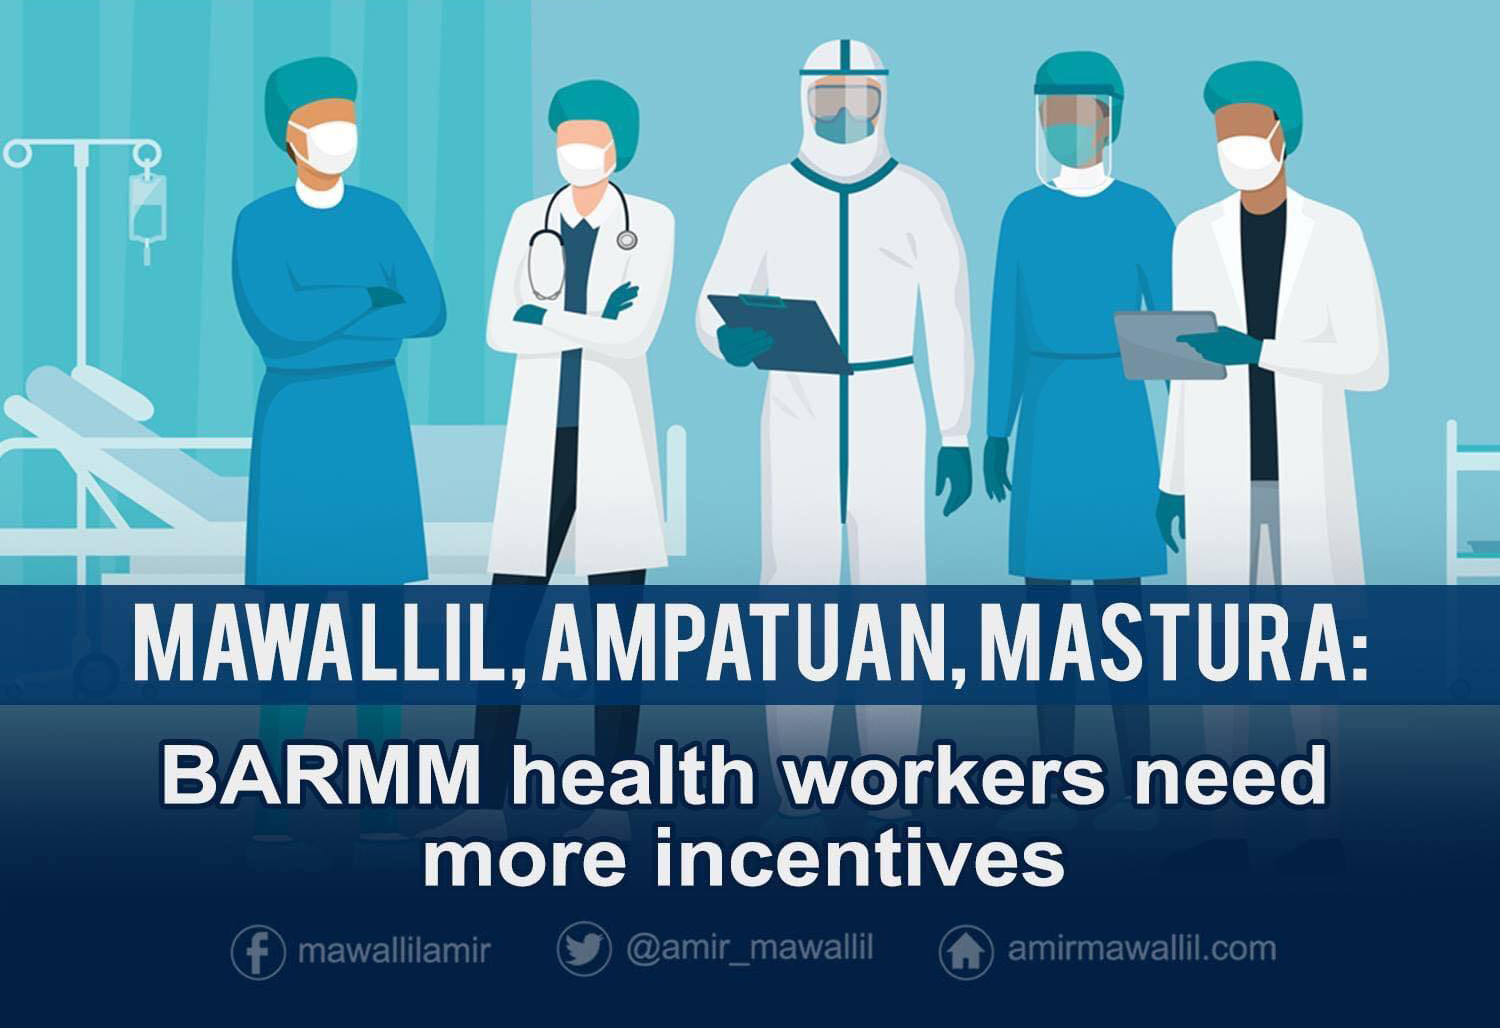 Bangsamoro lawmakers push for added incentives for health workers in BARMM